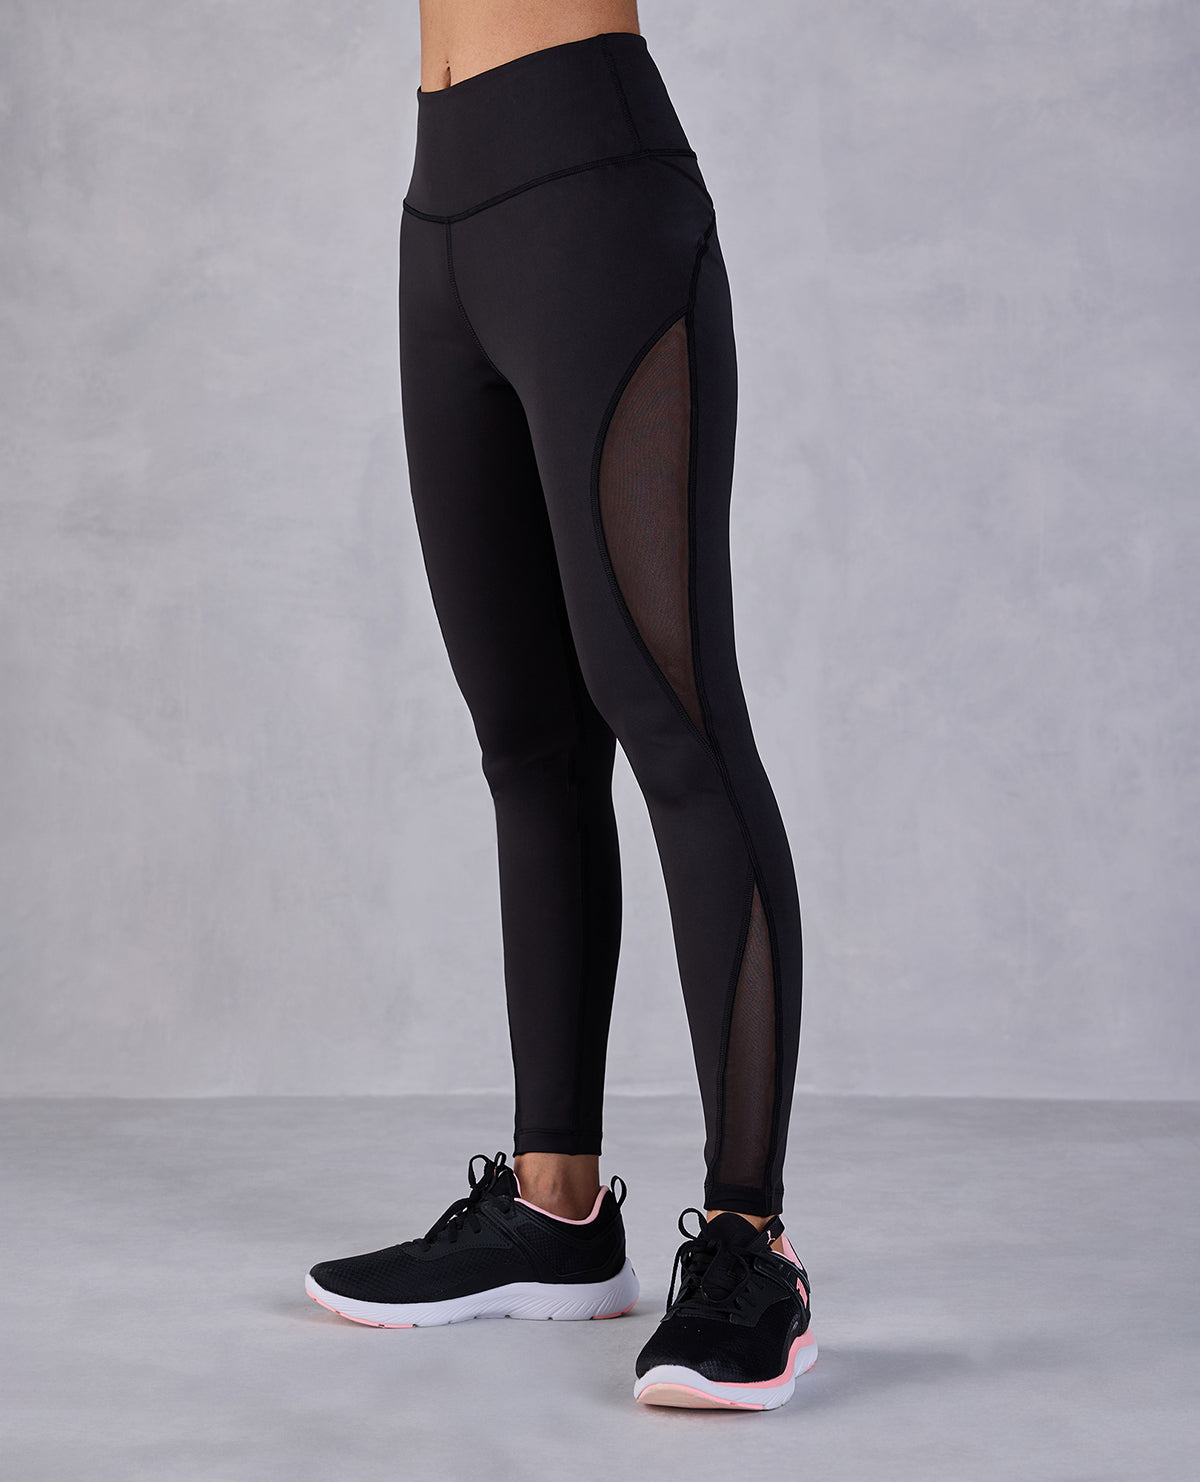 Buy Kica High Waisted Dual Coloured Leggings in Second SKN Fabric For Gym  and Training Online